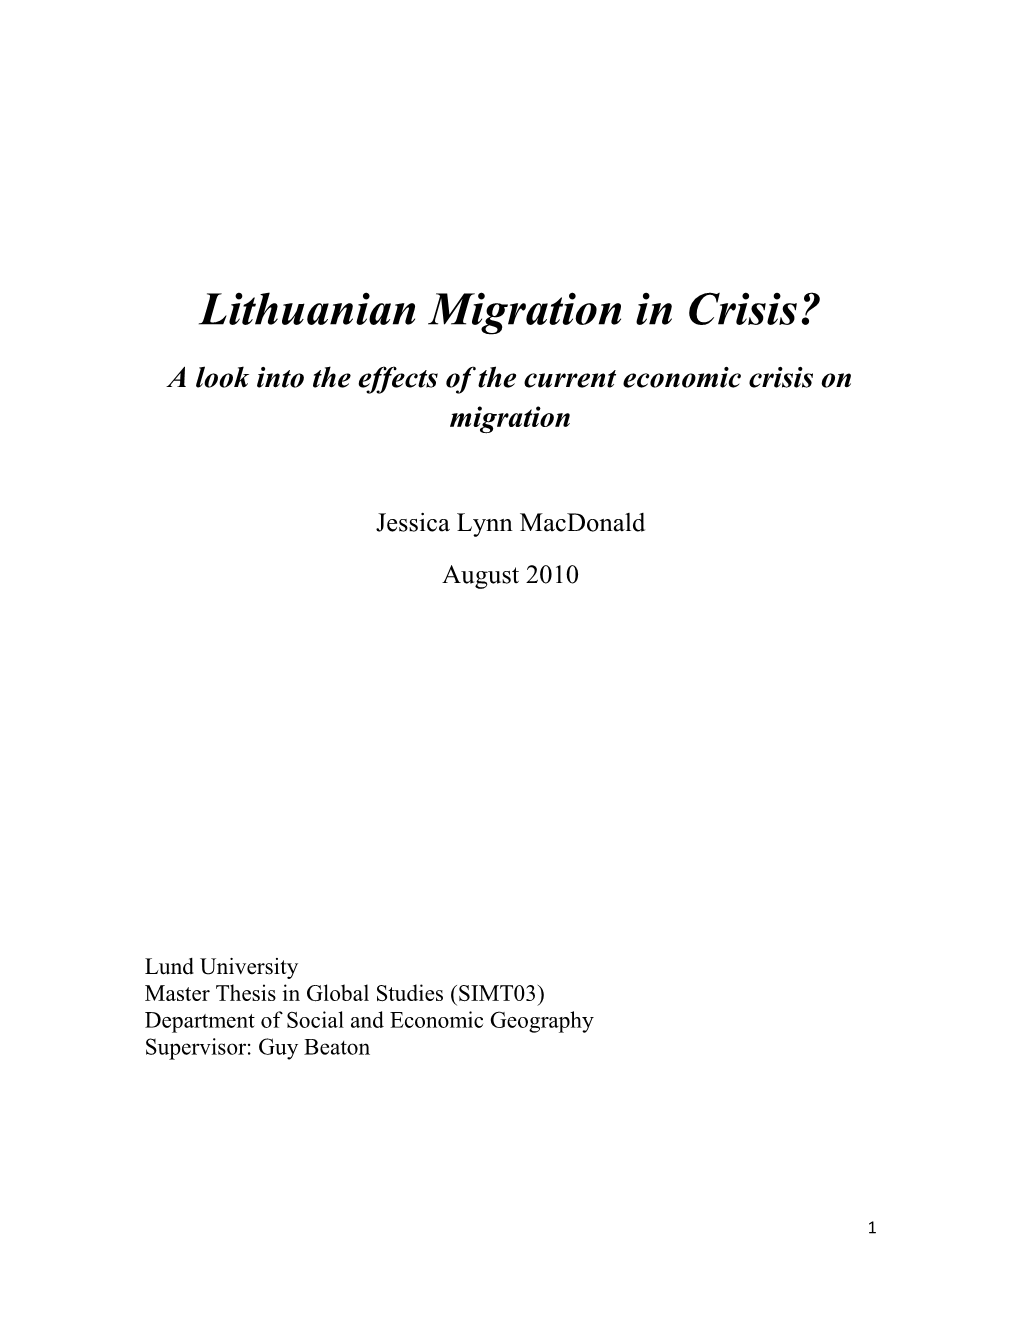 Lithuanian Migration in Crisis? a Look Into the Effects of the Current Economic Crisis on Migration